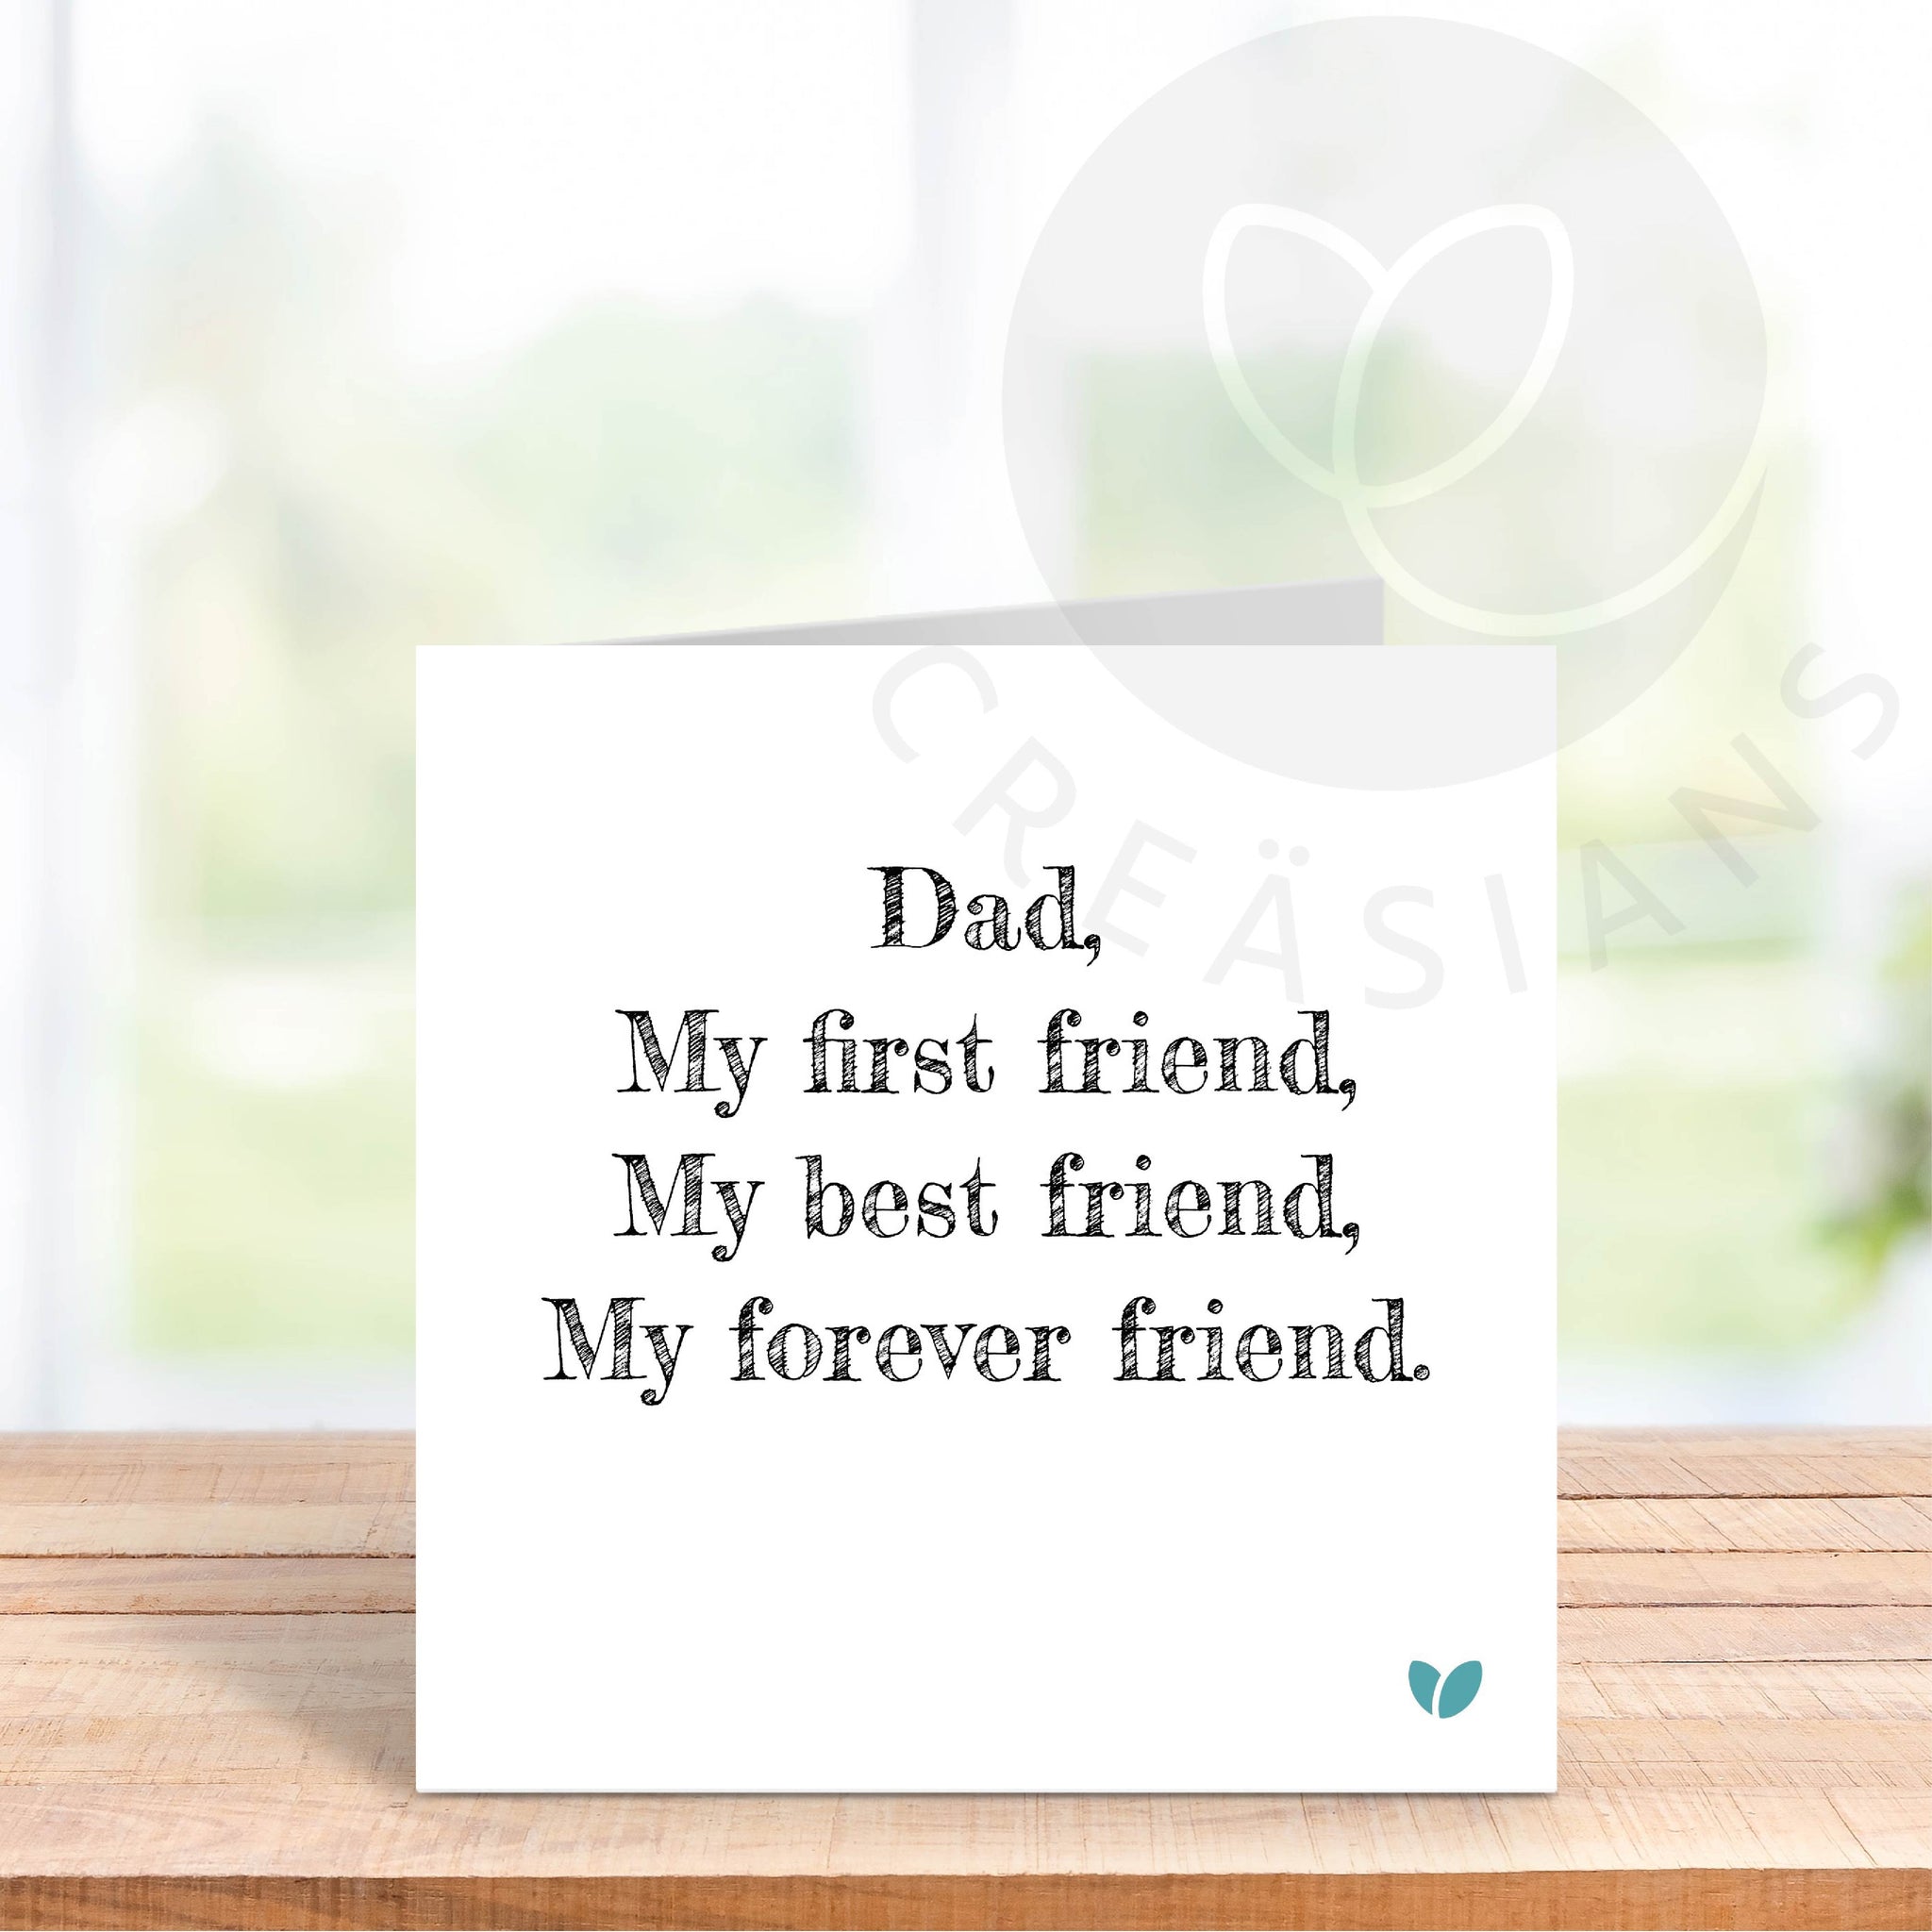 Fathers Day card - First friend, best friend, forever friend